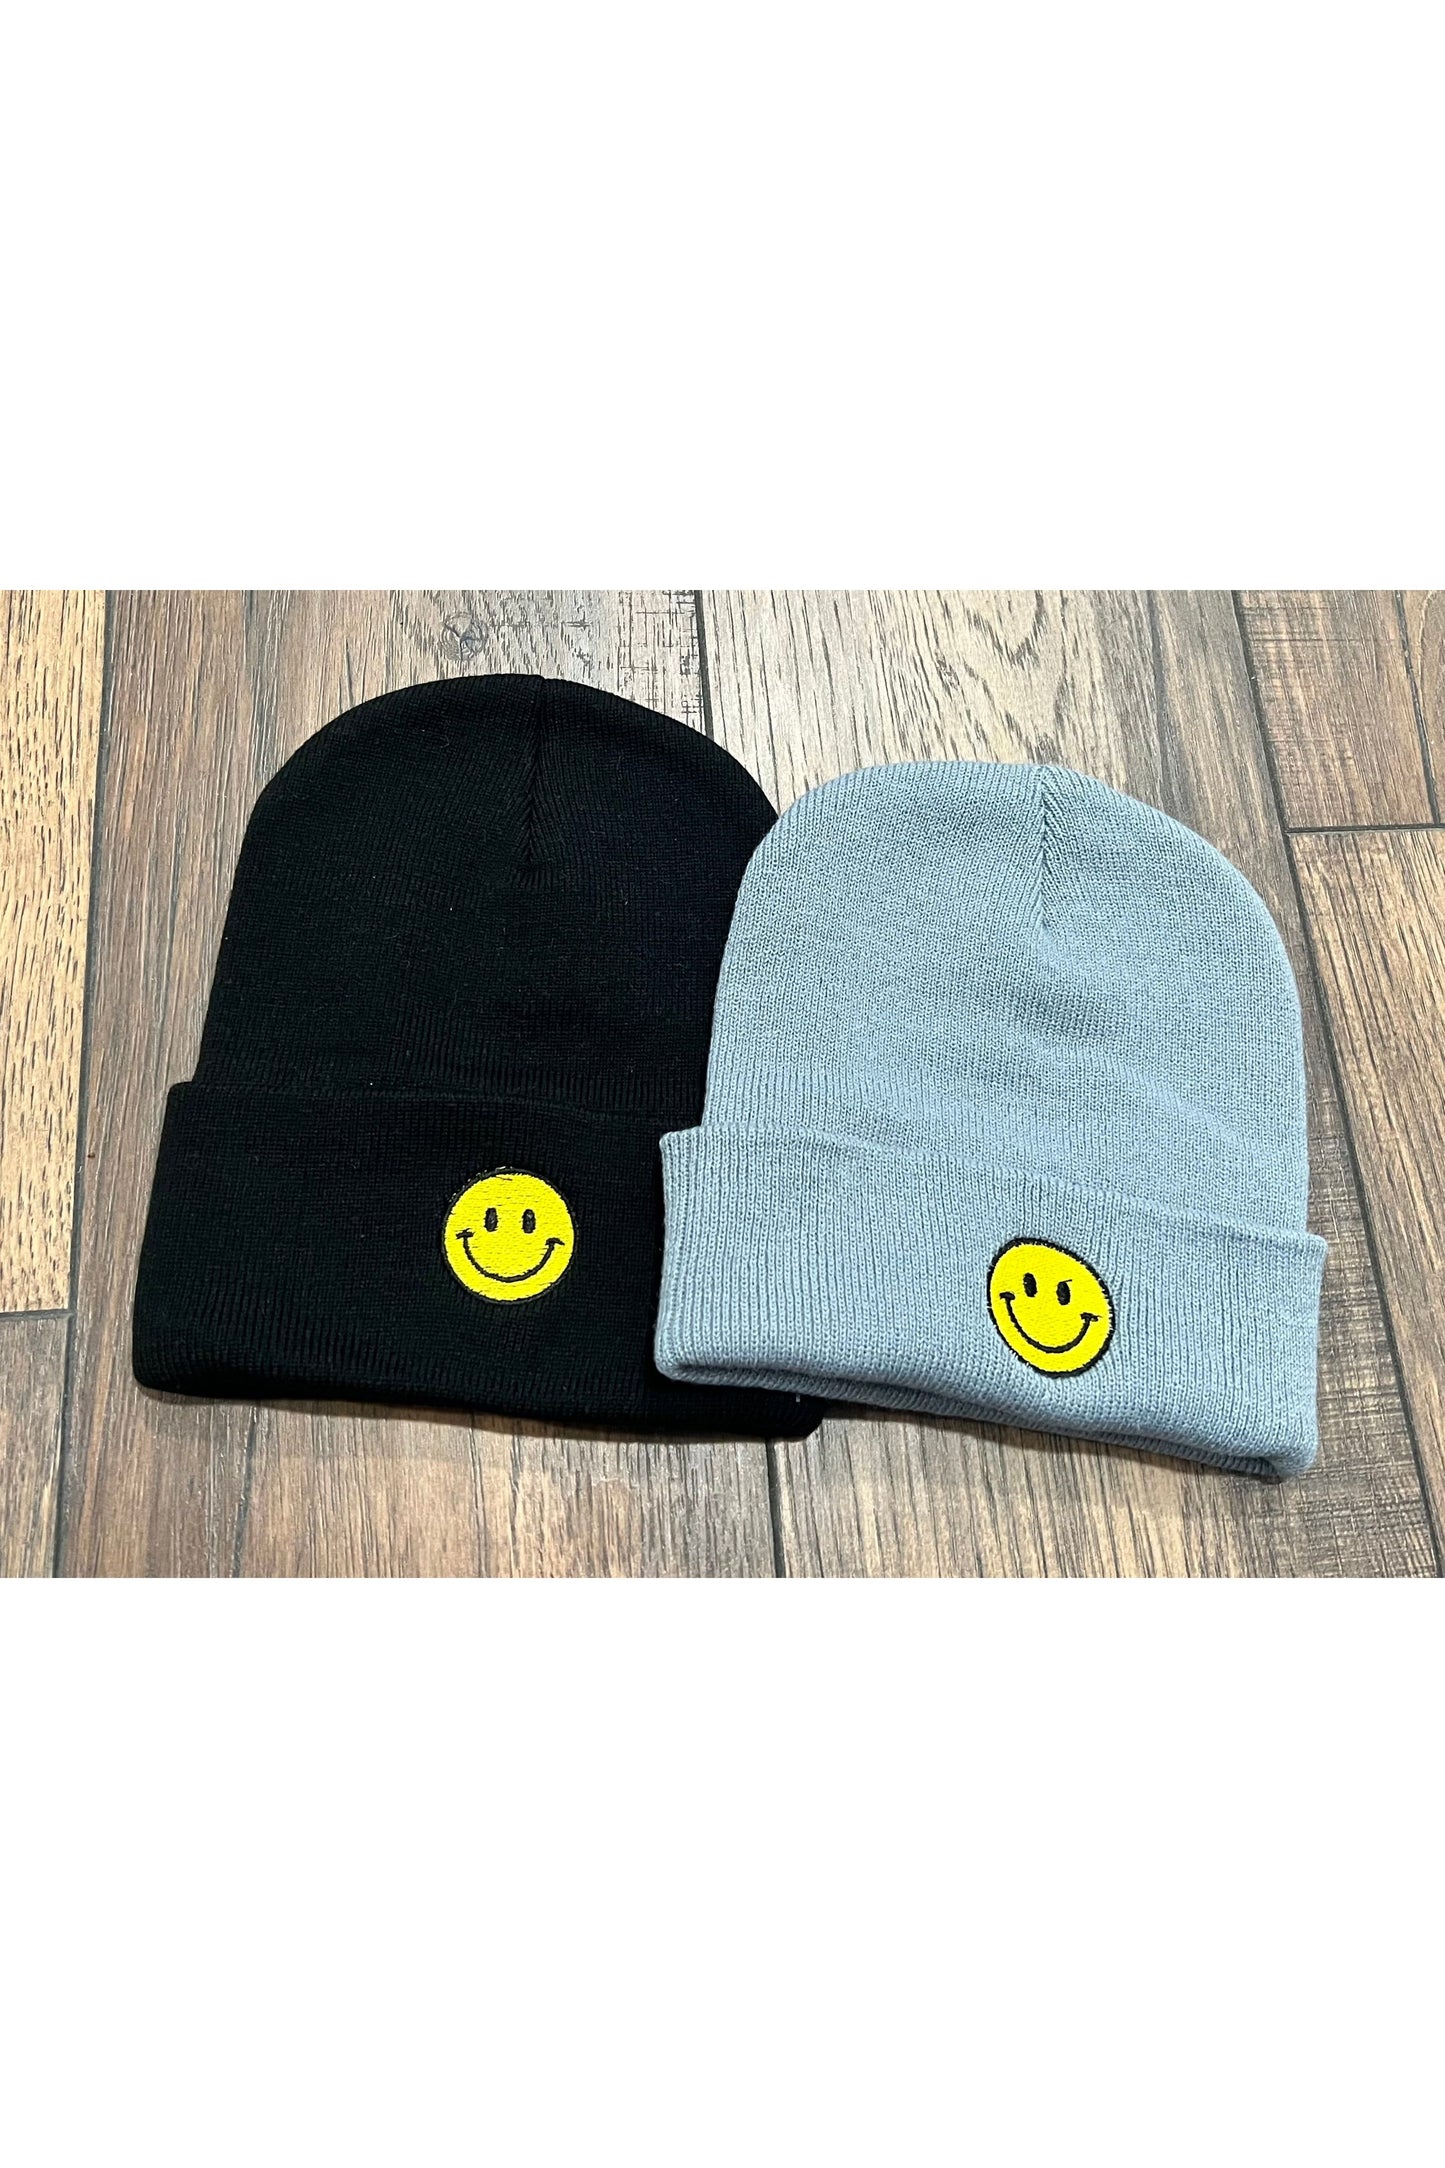 Embroidered Smiley Face Beanies